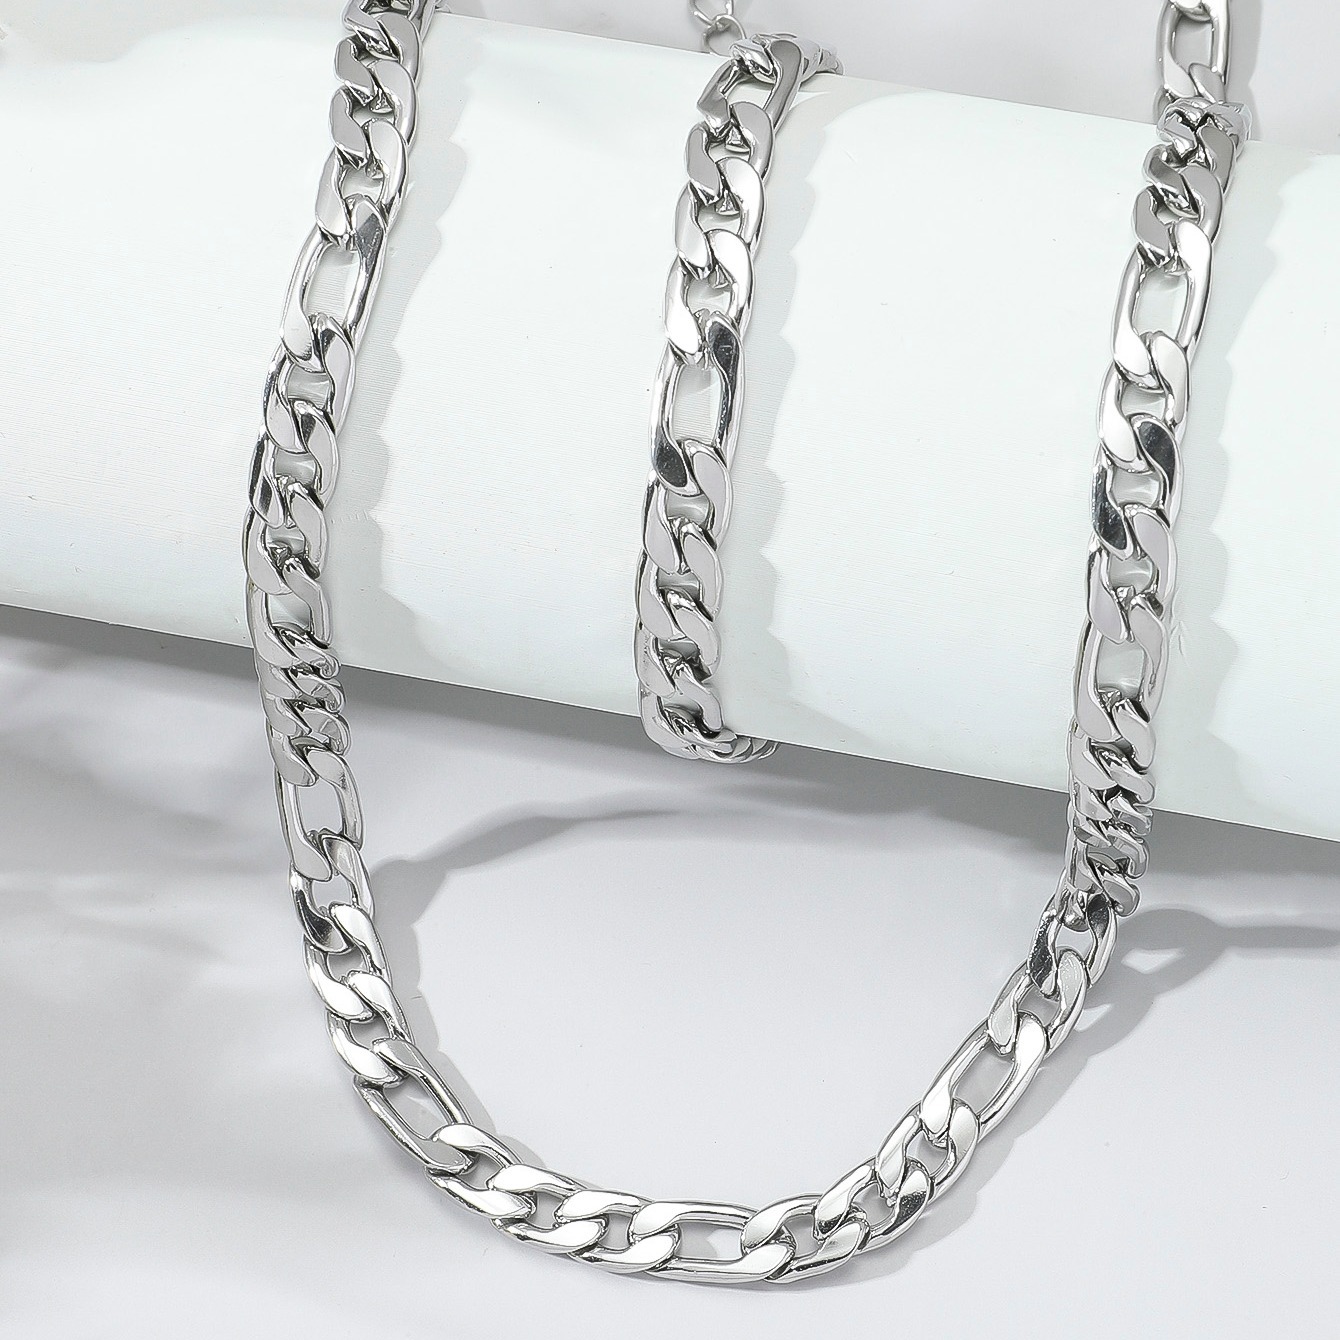 

1/2pcs Men's Titanium Steel Figaro Chain Stainless Steel Curb Necklace And Bracelet